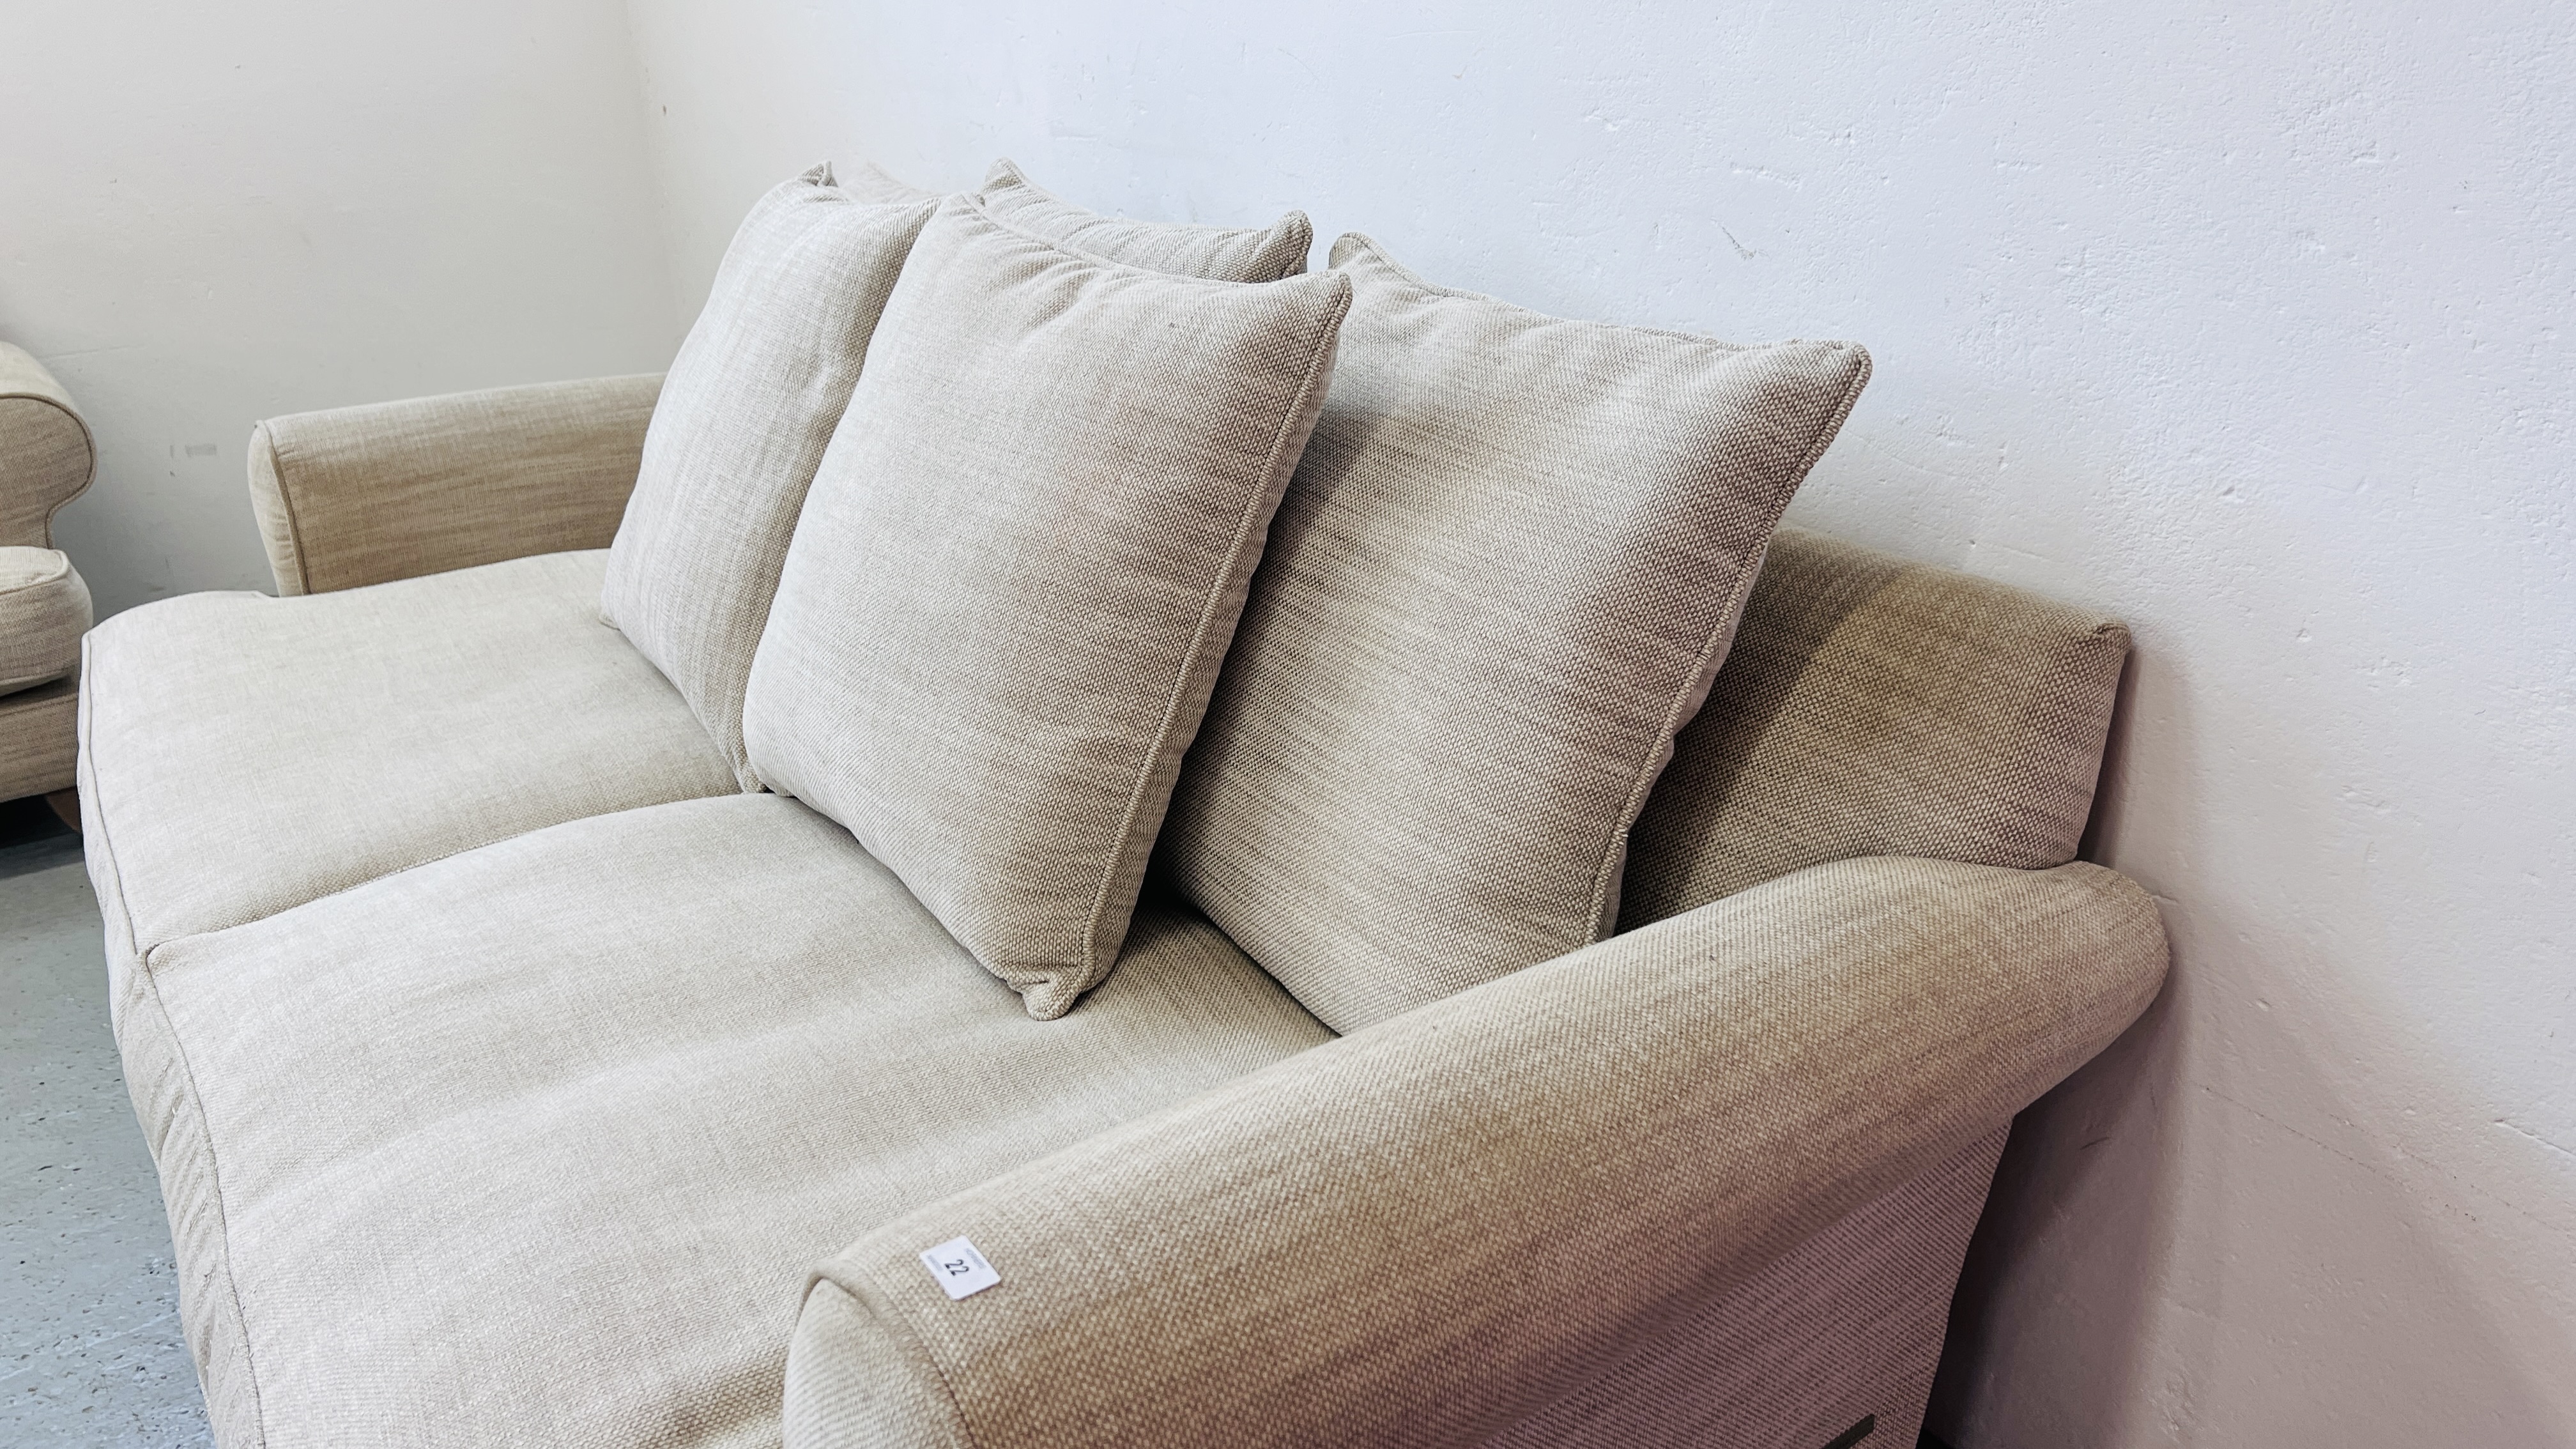 A PAIR OF "THE LOUNGE Co" OATMEAL UPHOLSTERED SOFA'S EACH LENGTH 210CM. - Image 4 of 22